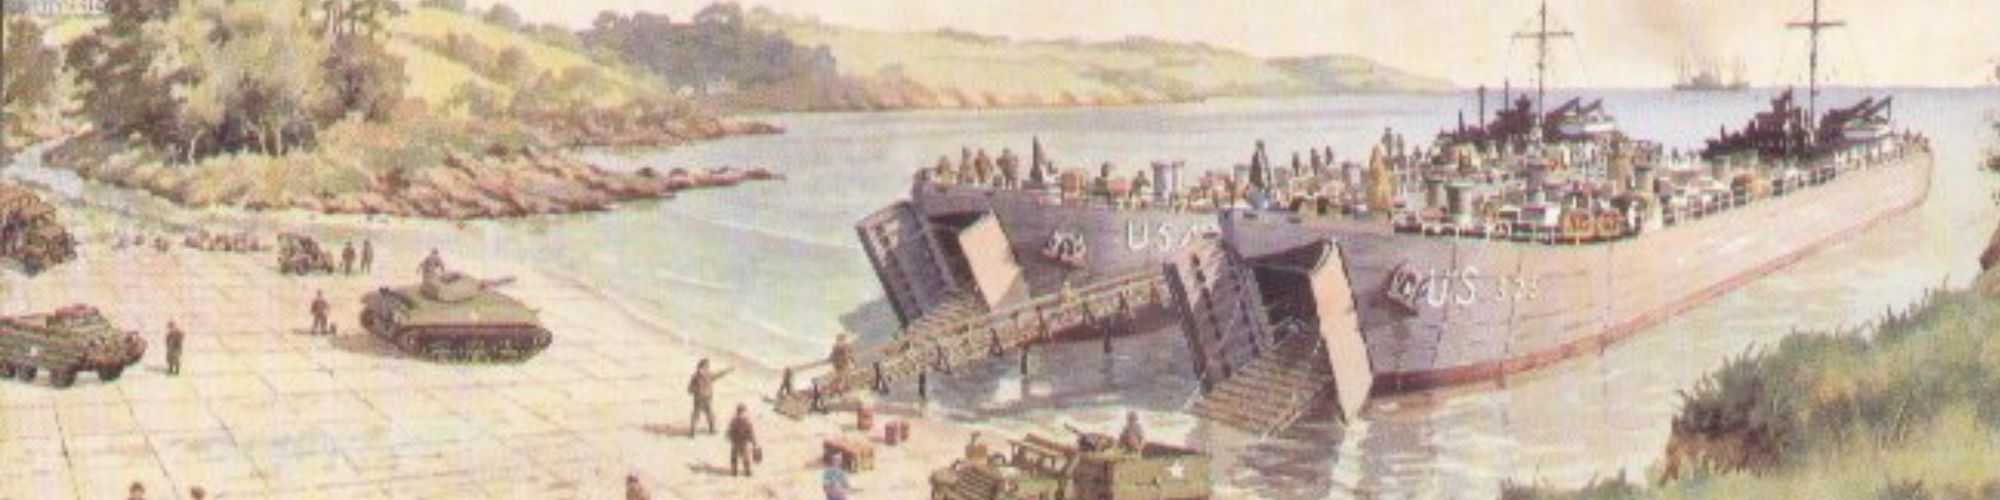 Colour postcard of a painting of Trebah Beach on the Helford River by FJ Waller. Annotated on the reverse: “The 175th Combat Team of 29th Infantry Division embarked at Trebah Beach on 1st June 1944 on LSTs (Landing Ship Tanks) to take part in the assault on Omaha Beach which was fiercely defended. From D-Day to VE Day, the Division gained a proud Record in the campaigns of Normandy, Northern France, Rhineland and Central Europe and suffered 19,814 casualties”.